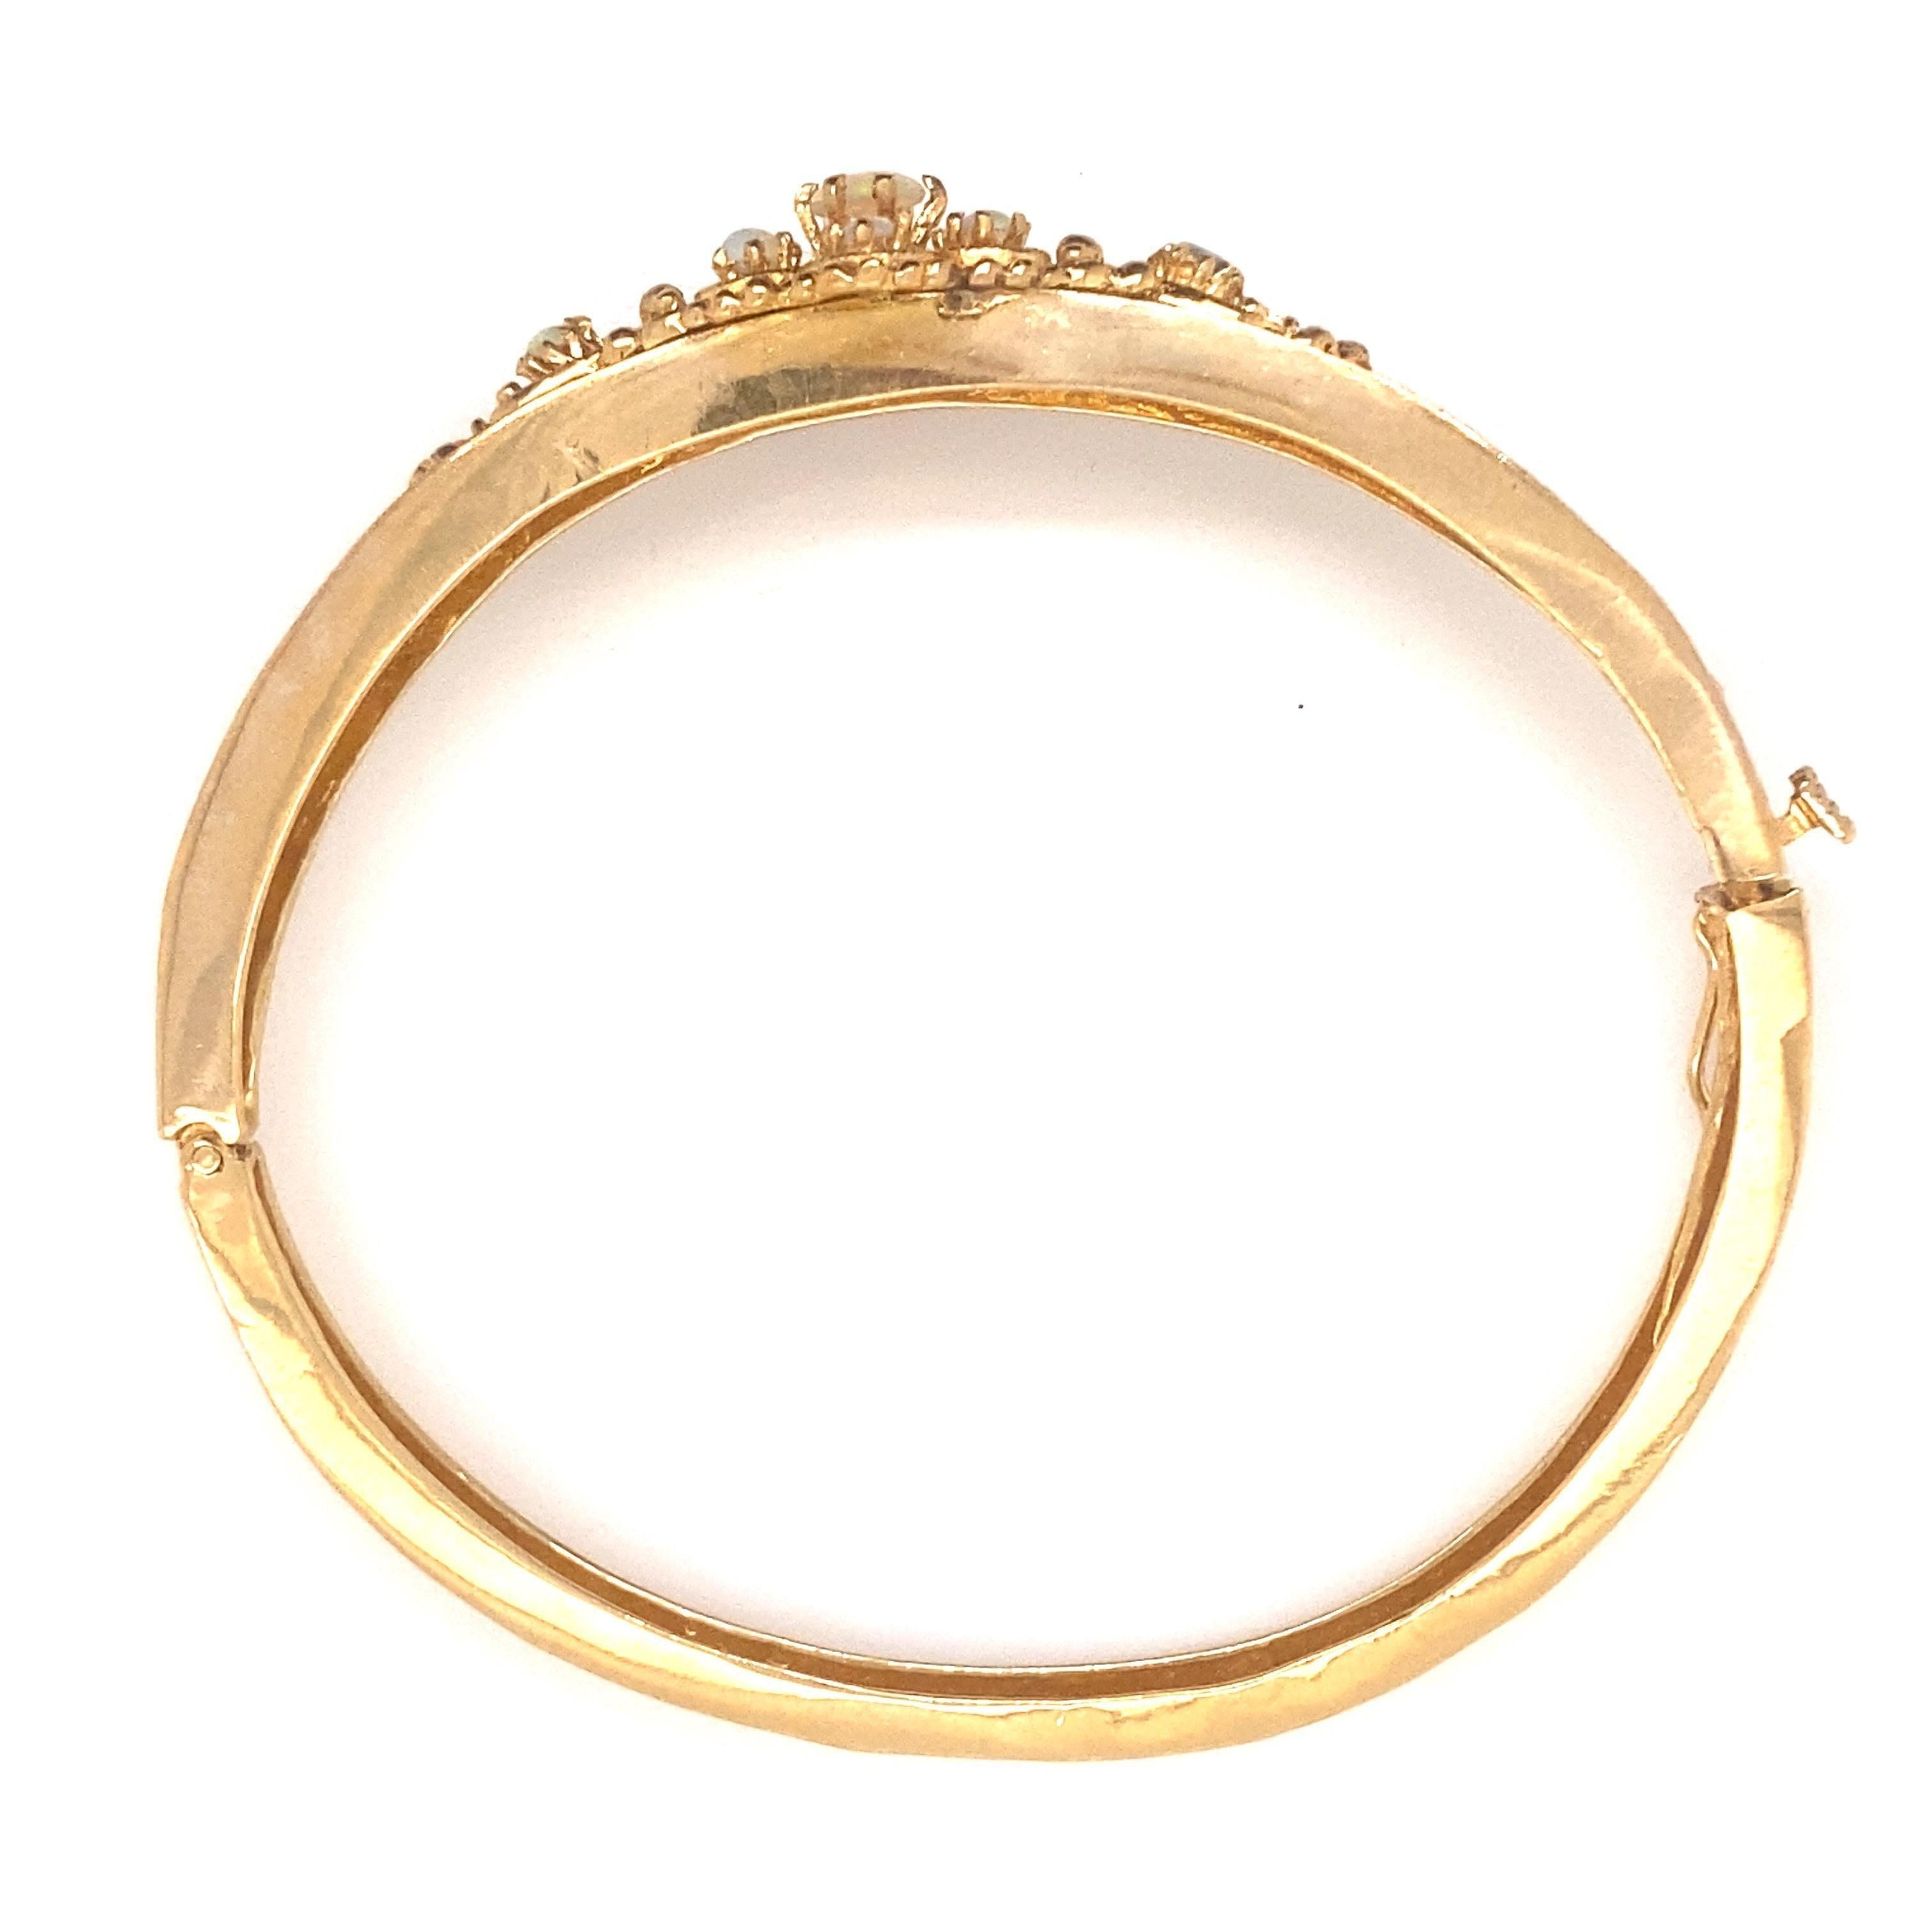 Vintage 14K Yellow Gold Victorian Reproduction Opal Bangle Bracelet In Good Condition For Sale In Boston, MA